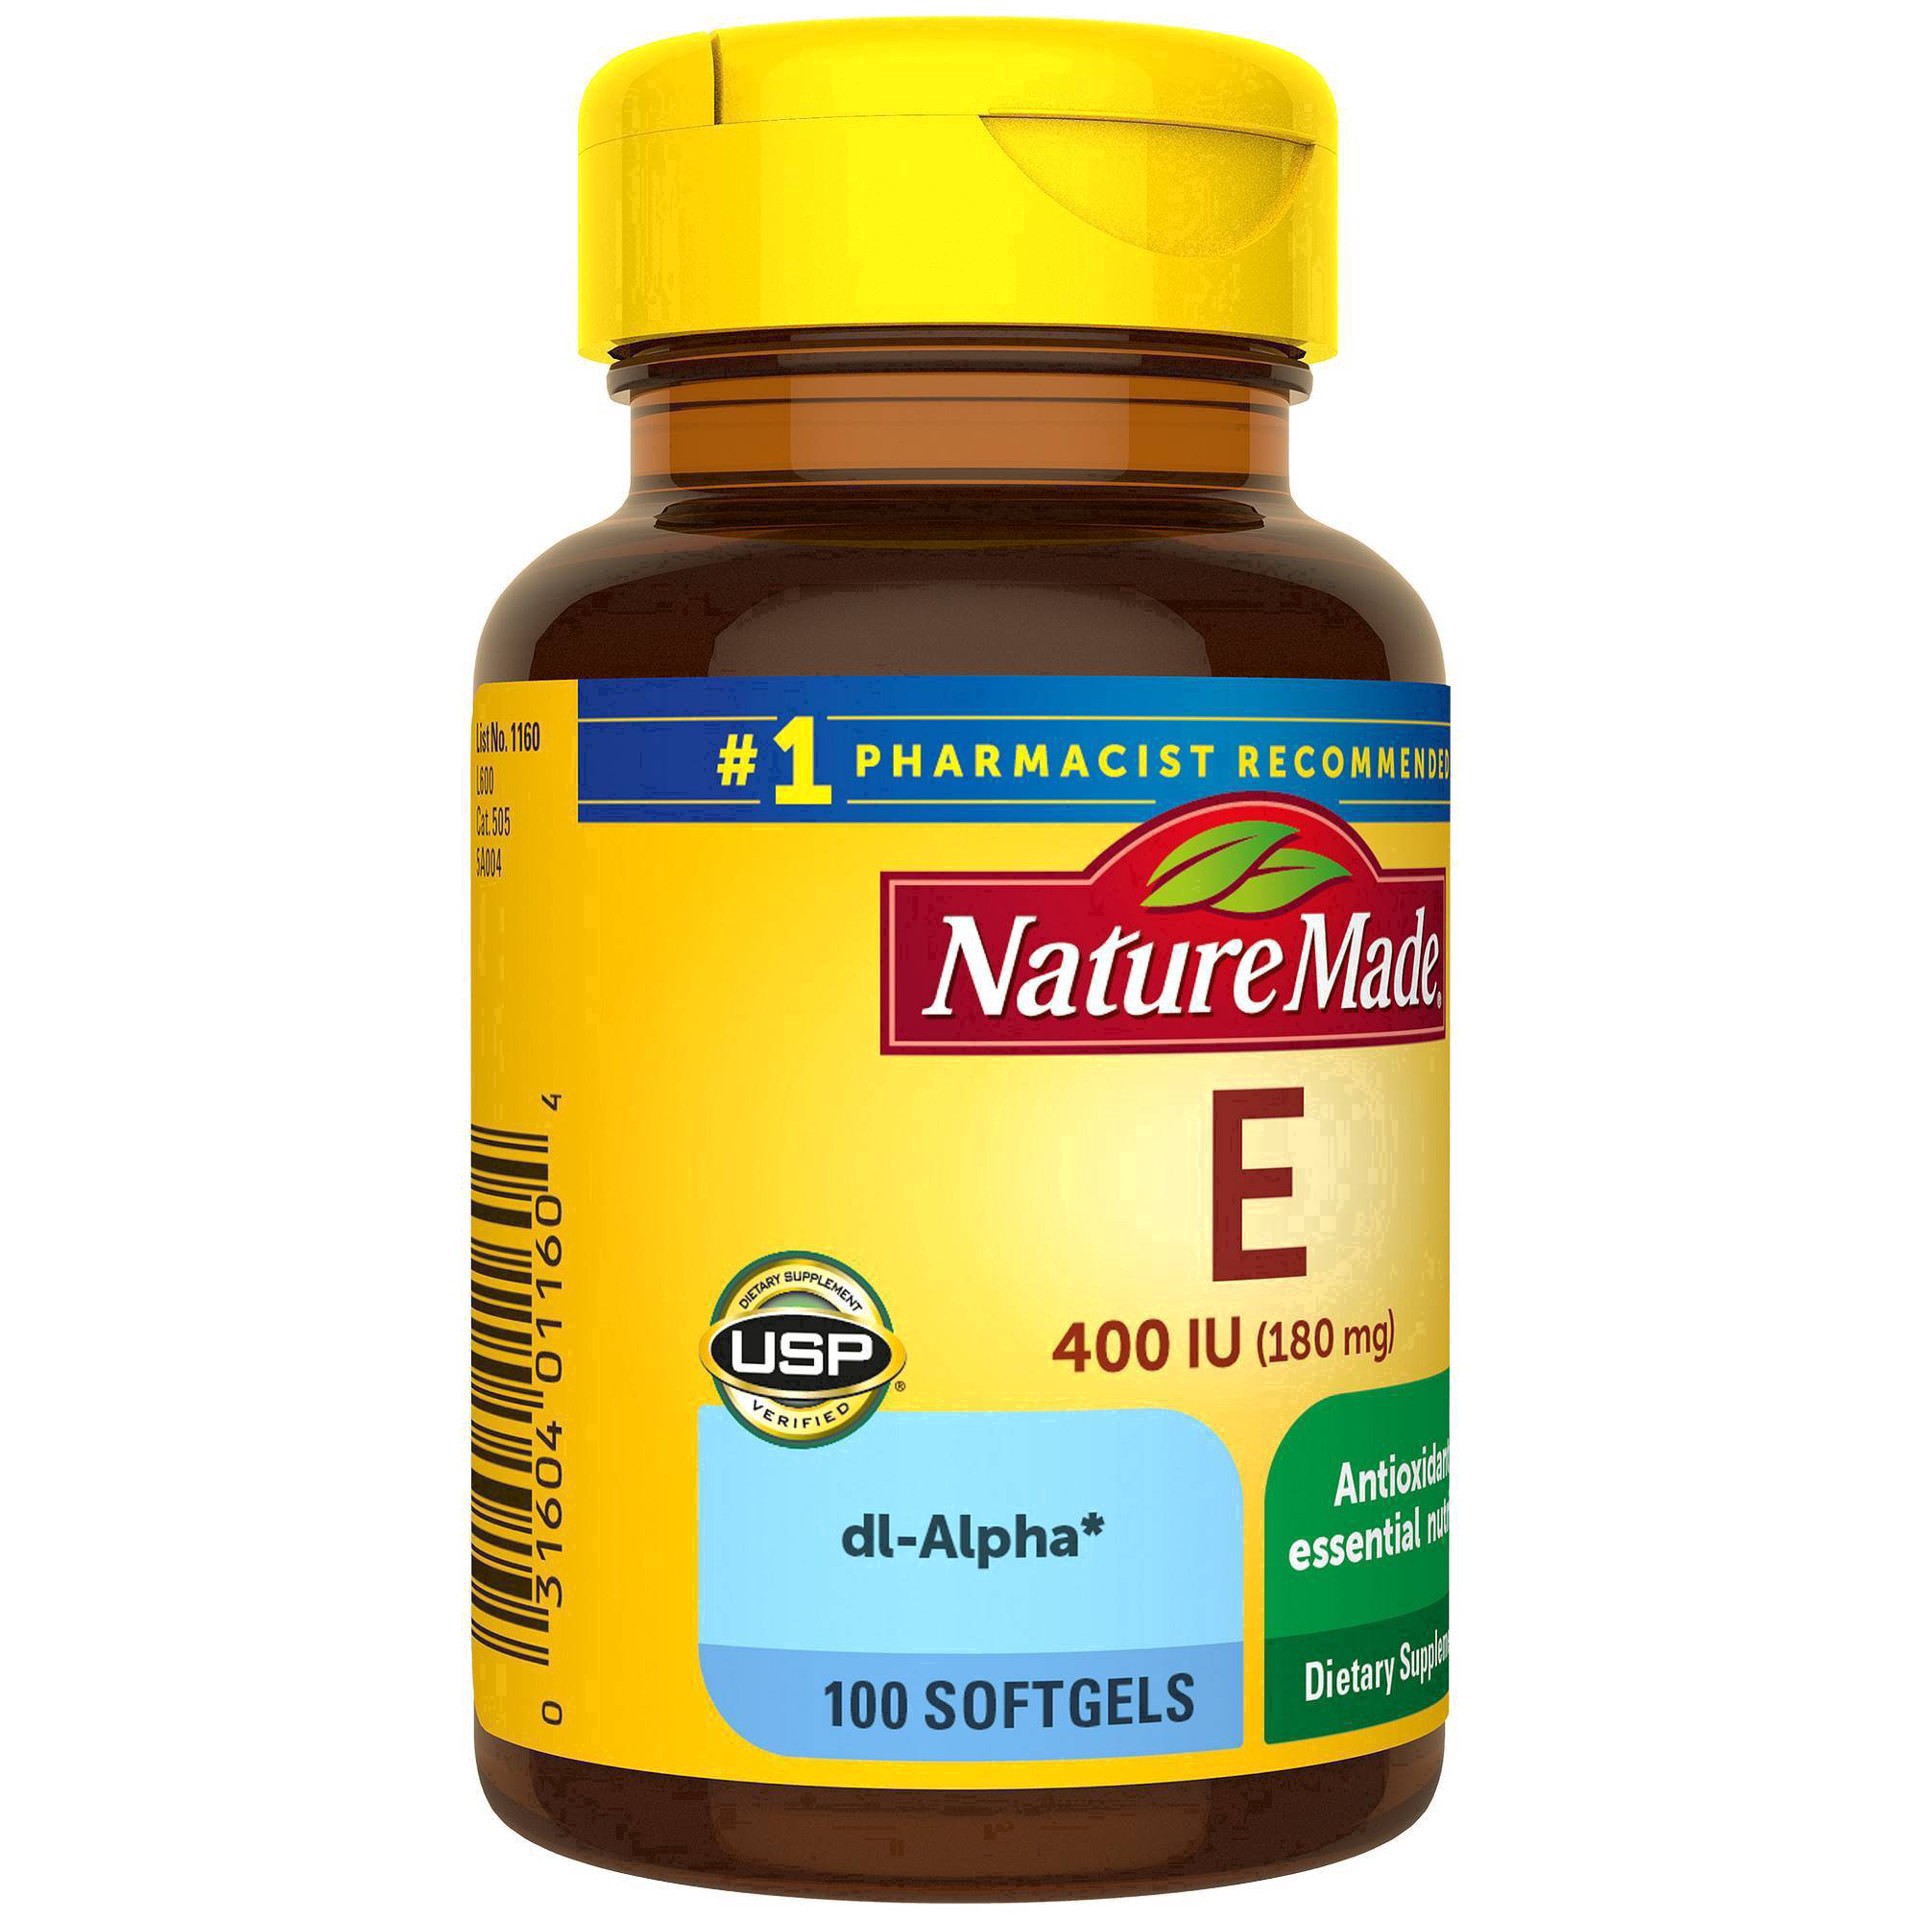 slide 39 of 74, Nature Made Vitamin E 180 mg (400 IU) dl-Alpha, Dietary Supplement for Antioxidant Support, 100 Softgels, 100 Day Supply, 100 ct